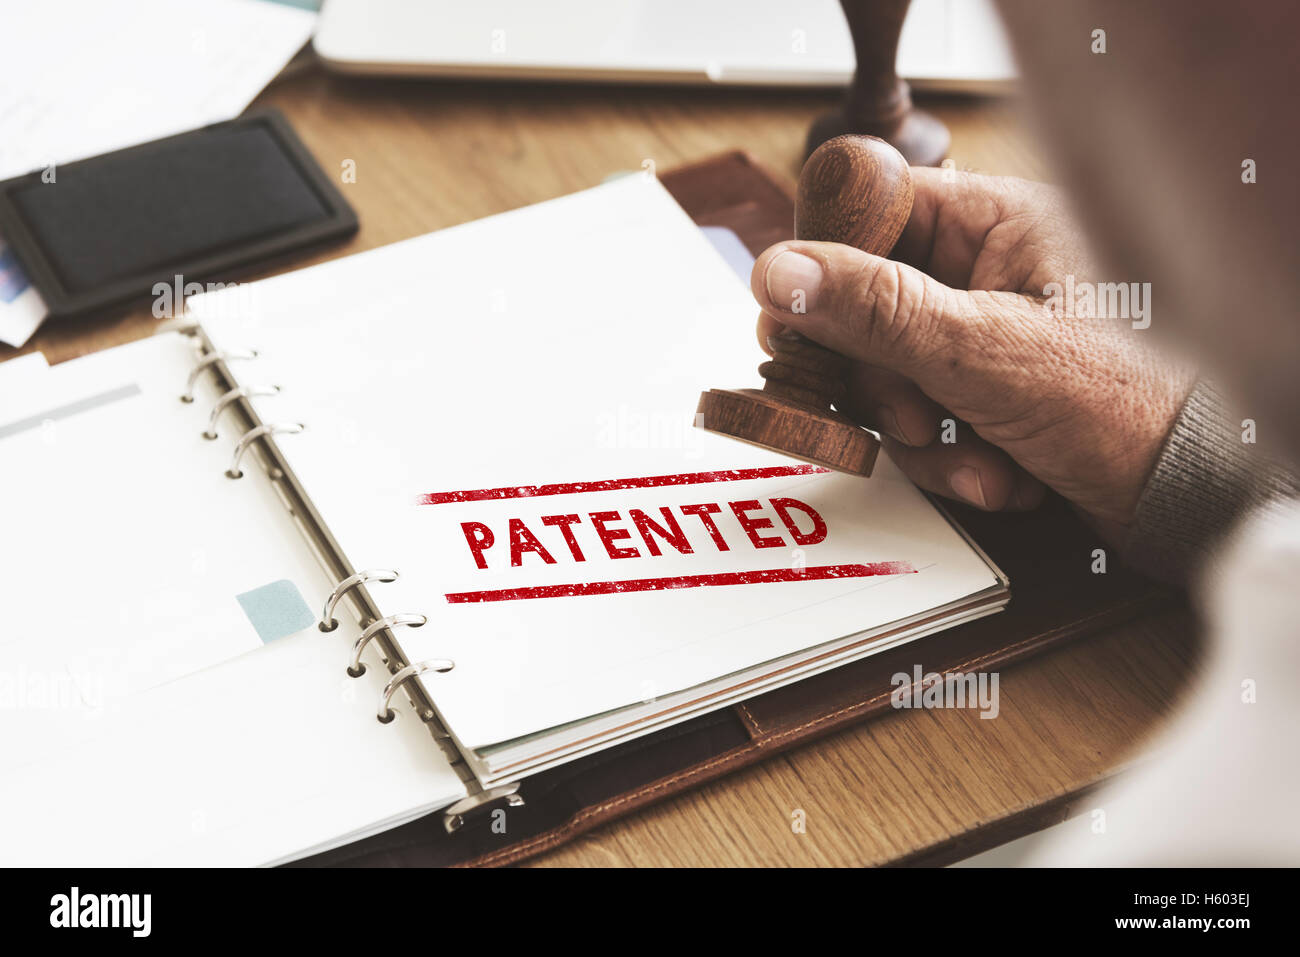 Patented Brand Identity License Product Copyright Concept Stock Photo